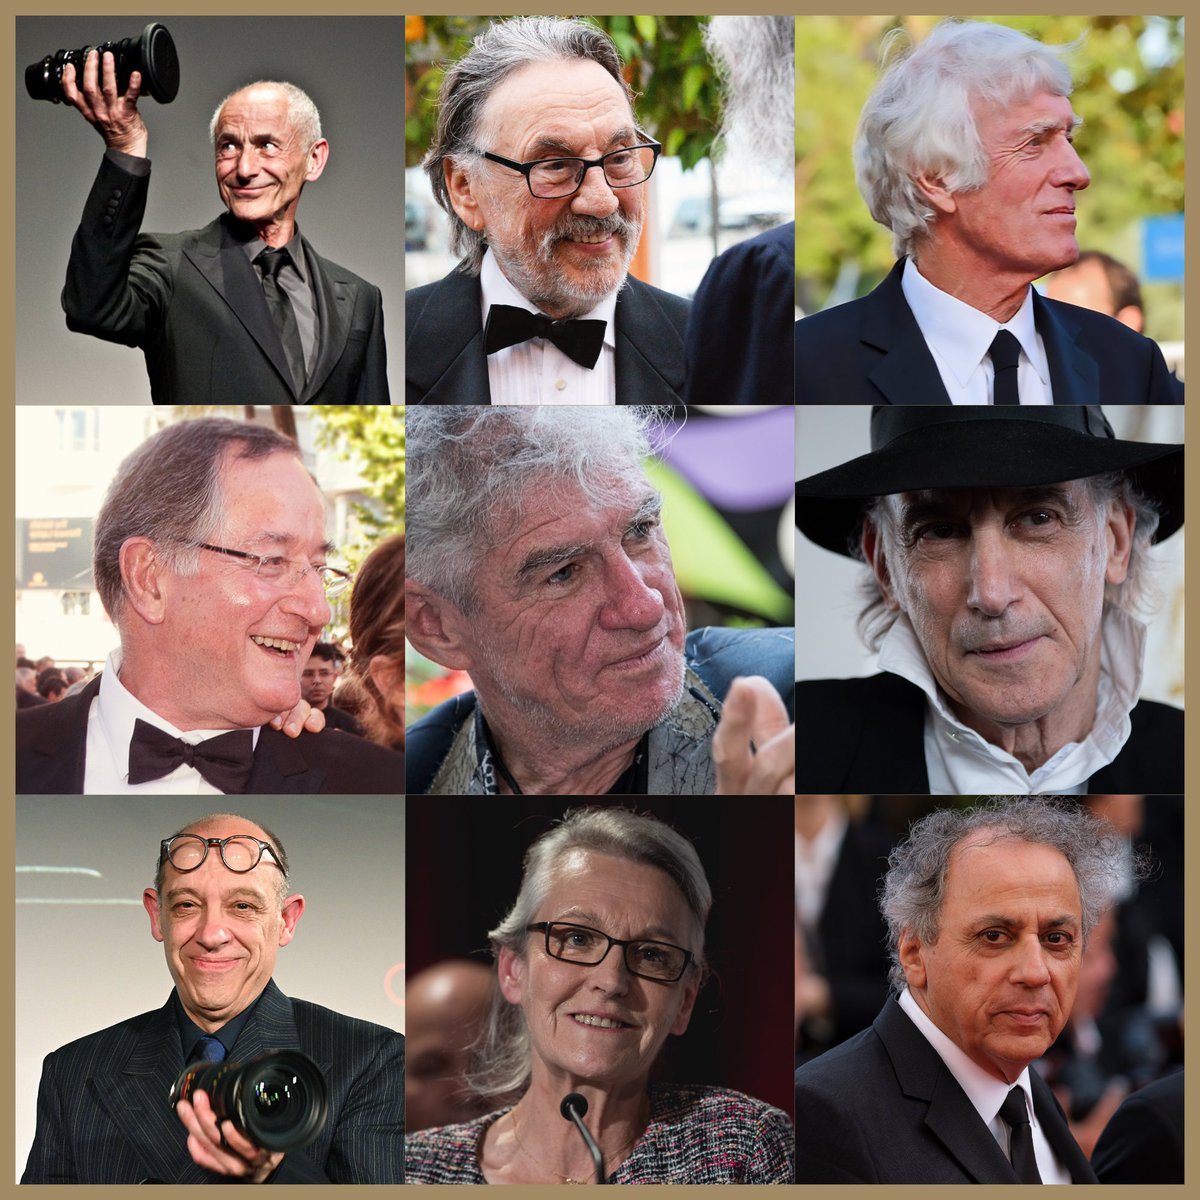 🎥 #AngenieuxCelebrates a decade of cinematography's greatest masters! Join us in honoring the contributions and achievements of renowned Directors of Photography with the #PierreAngenieuxTribute. Discover the history & ethos of this prestigious event: angenieux.com/pierre-angenie…